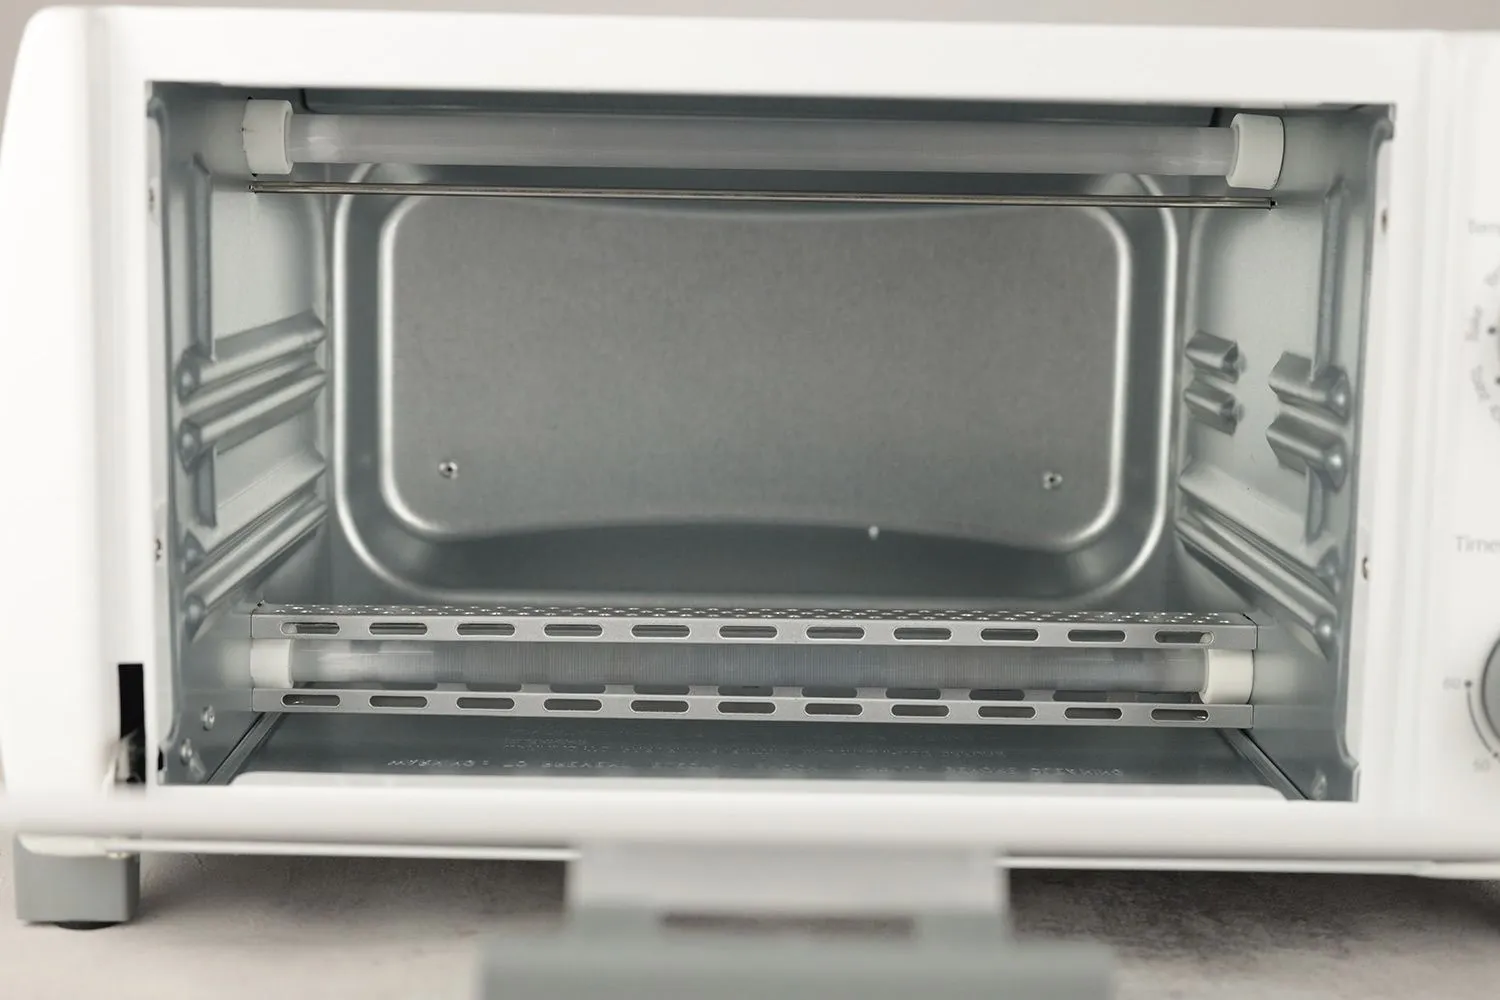 COMFEE Toaster Oven (CFO-BB101) In-depth Review - Healthy Kitchen 101